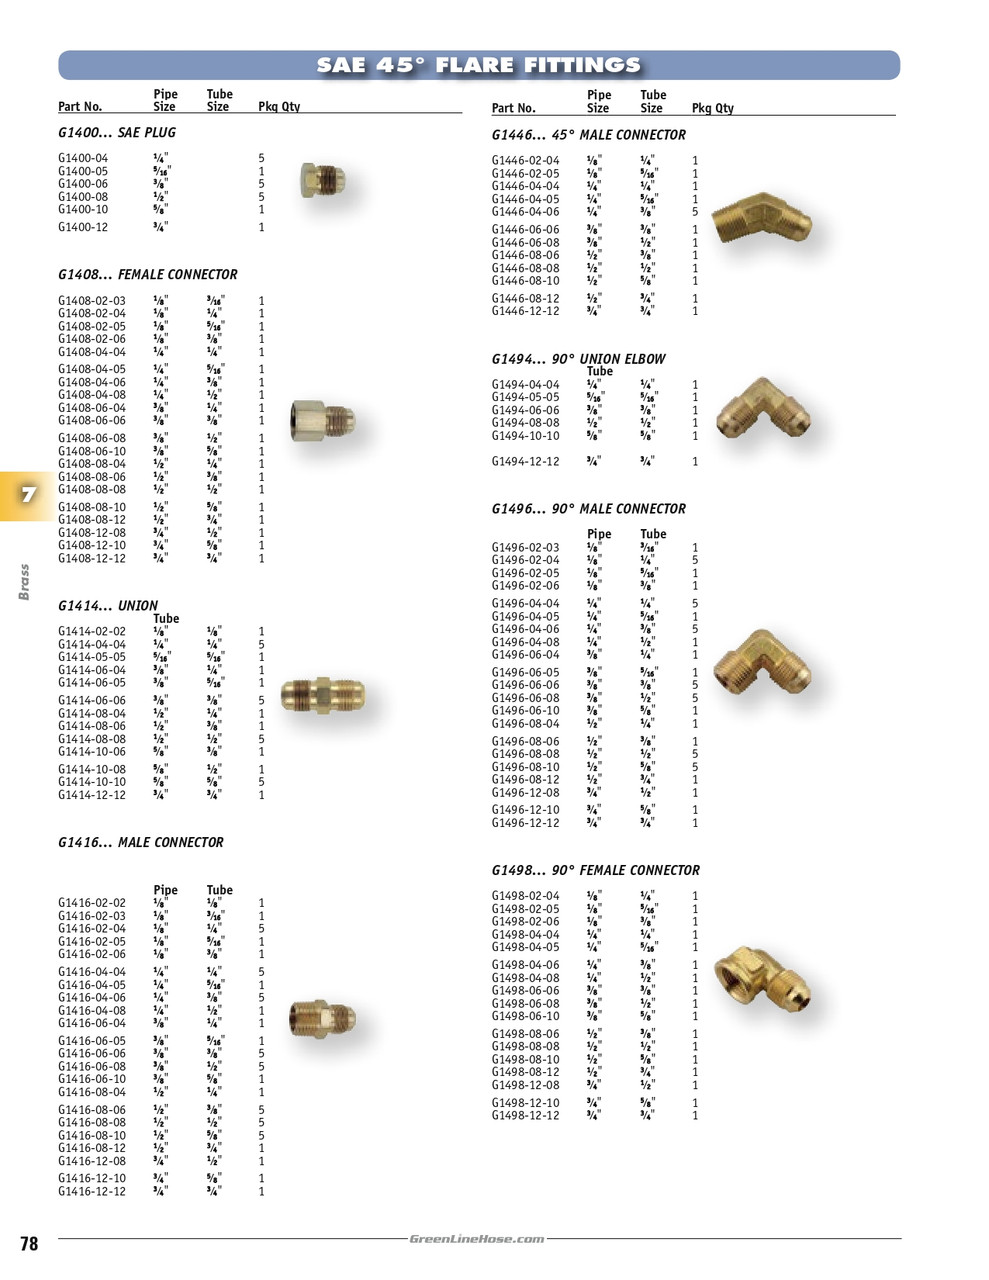 1/4 x 3/8" Brass Female NPT - Male 45° SAE Flare Connector   G1408-04-06